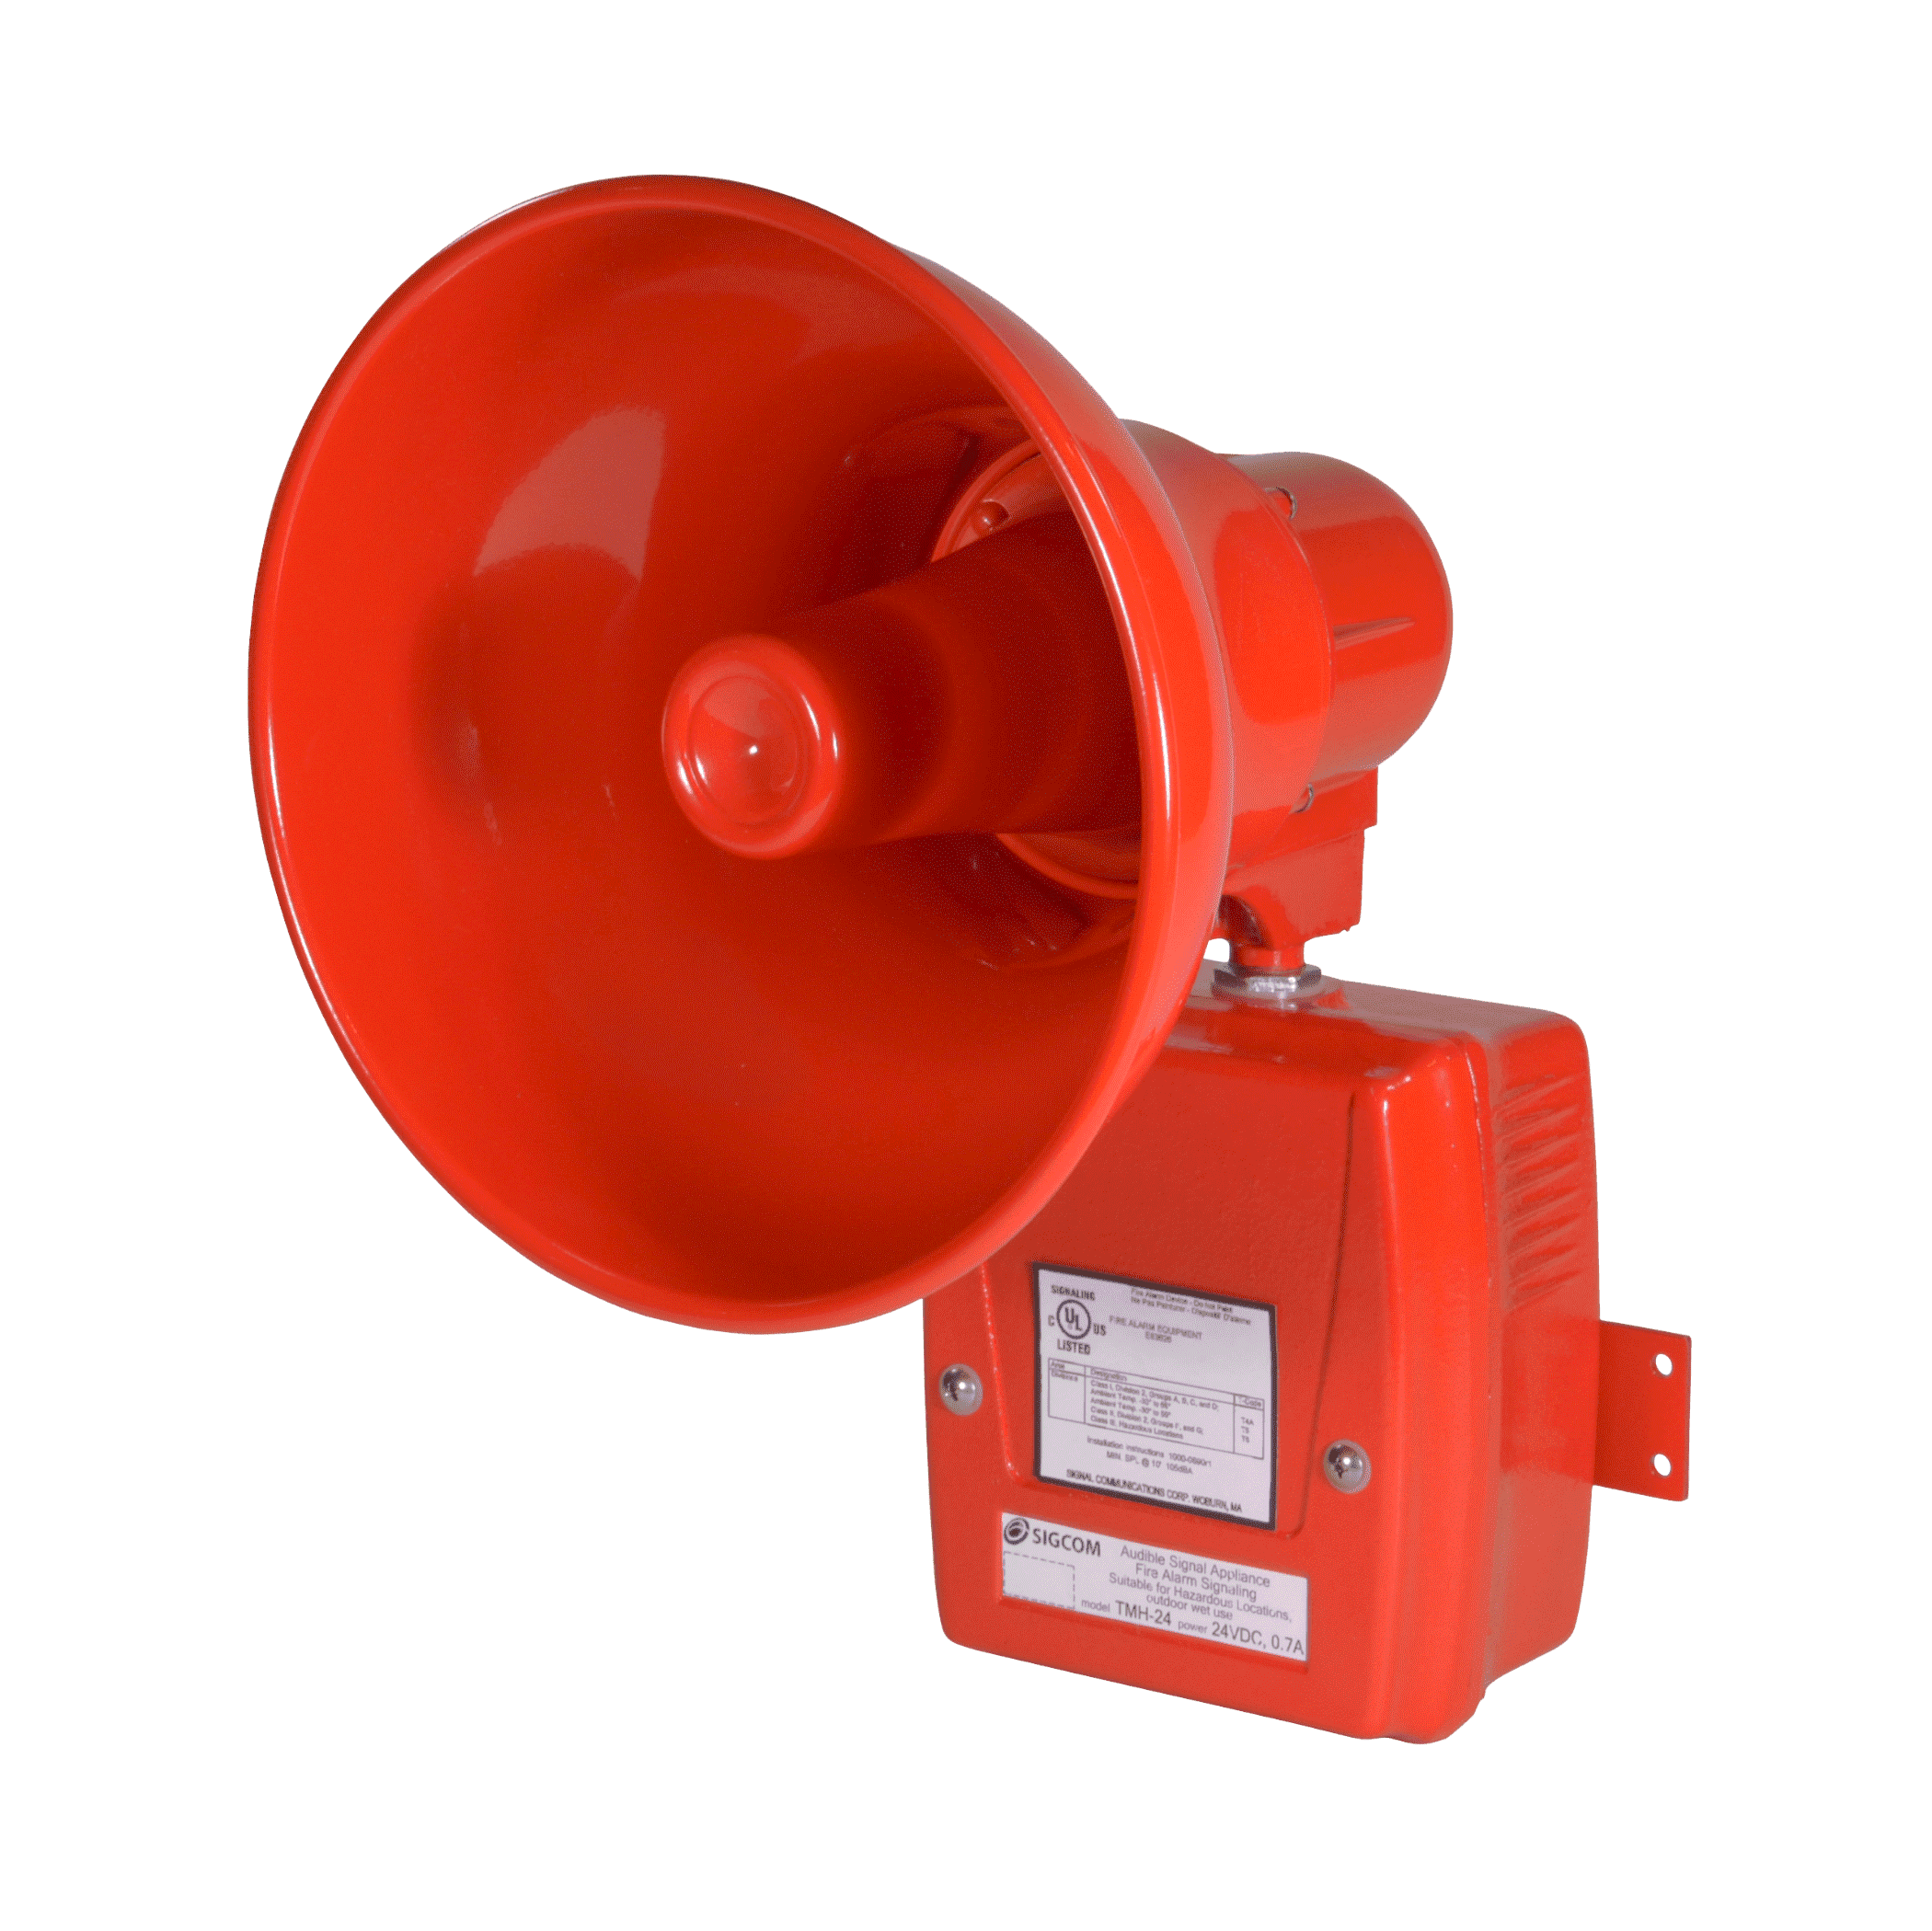 In industrial and other settings where heavy equipment is often used, this AM Series signal provides a higher audio output than traditional models. This horn uses continuous-duty, edge-amplified speakers.